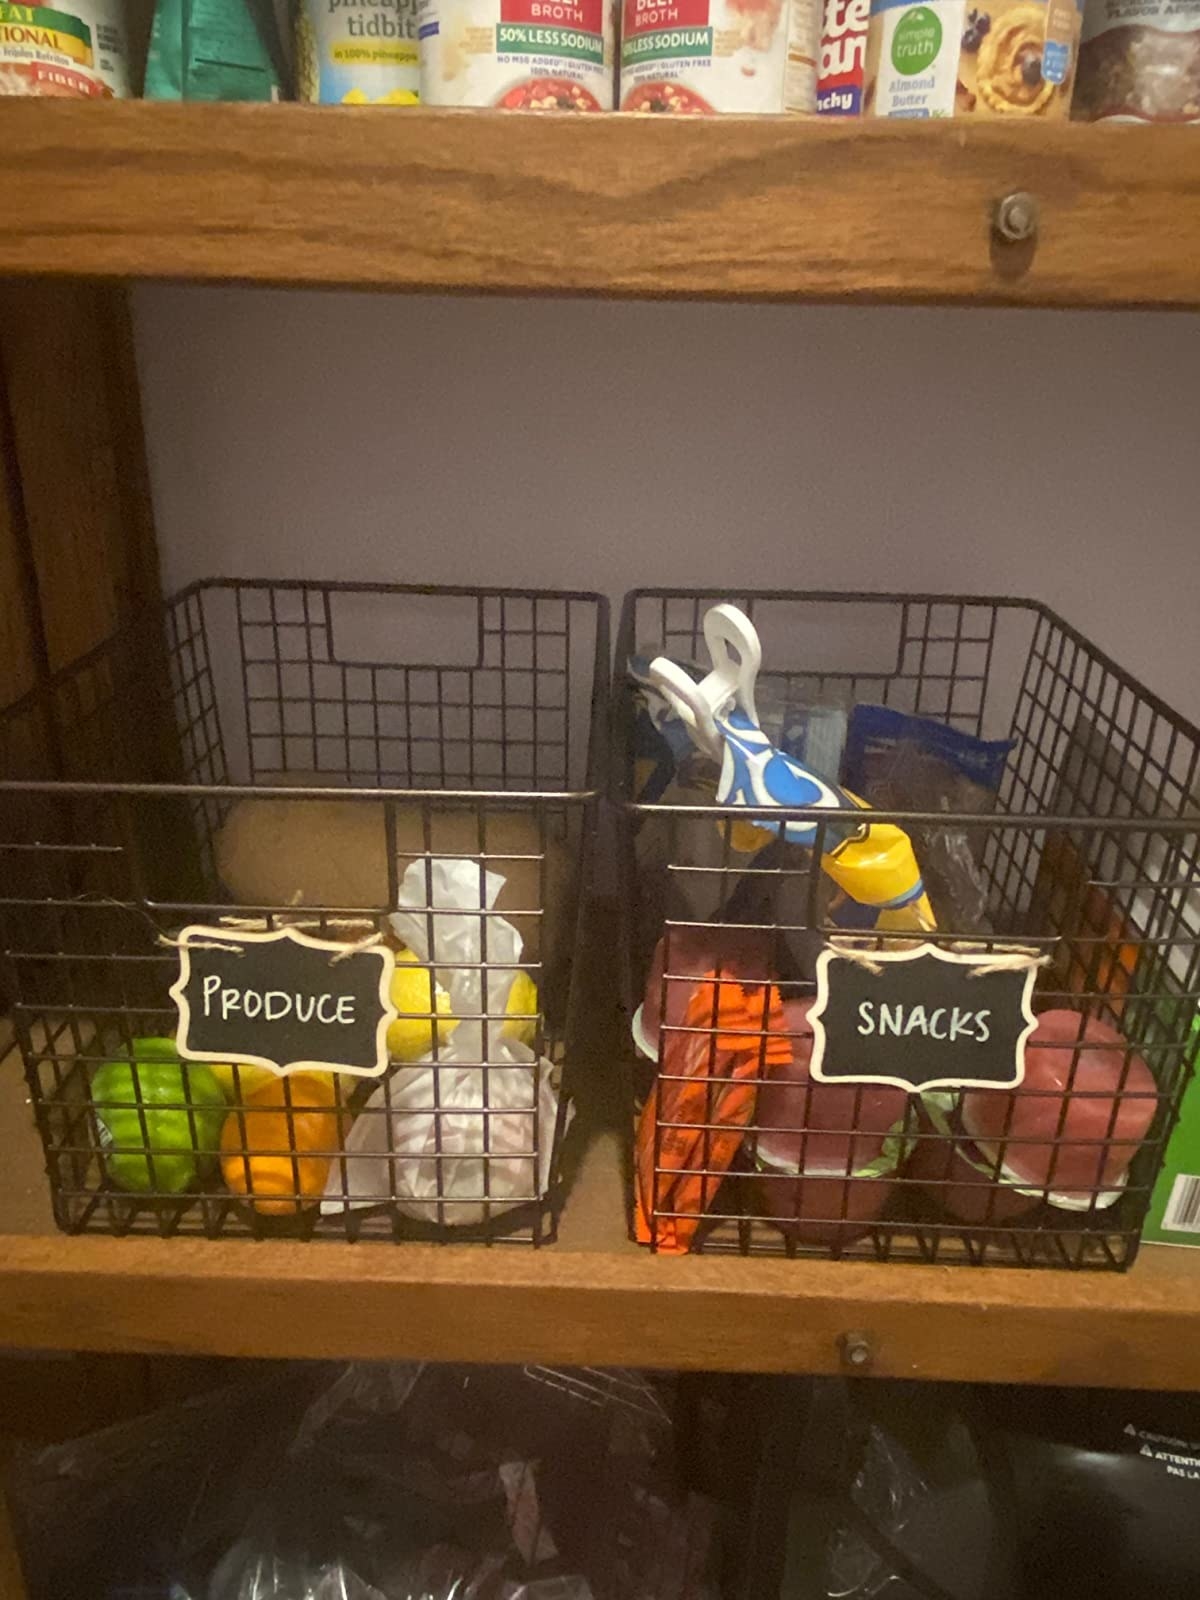 Reviewer image of wire baskets in a pantry